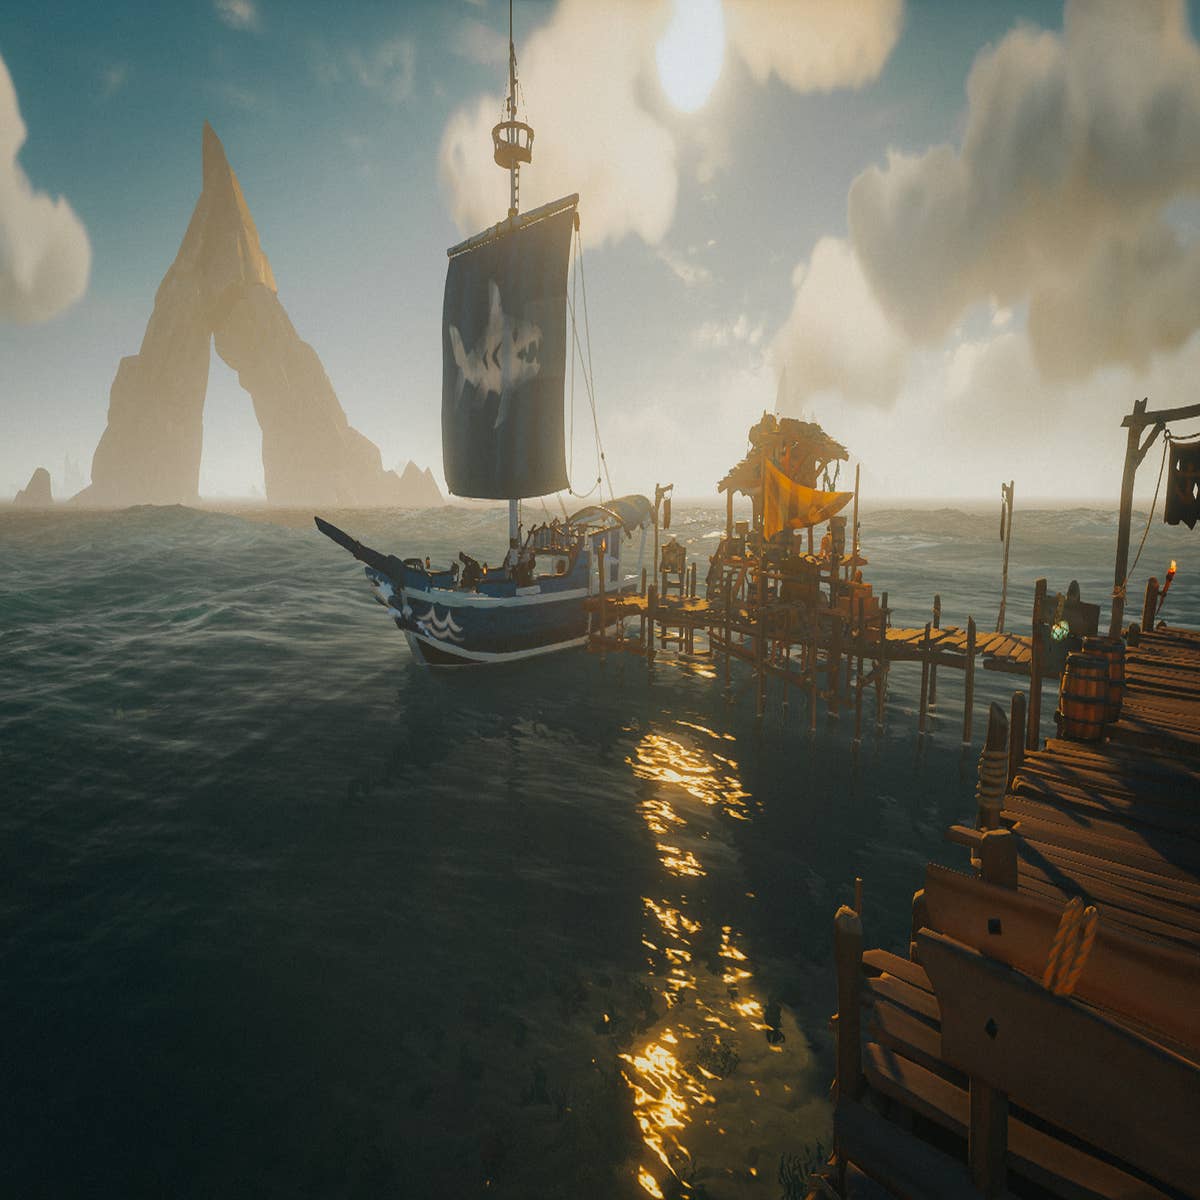 Sea of Thieves' long-awaited private servers arrive next week